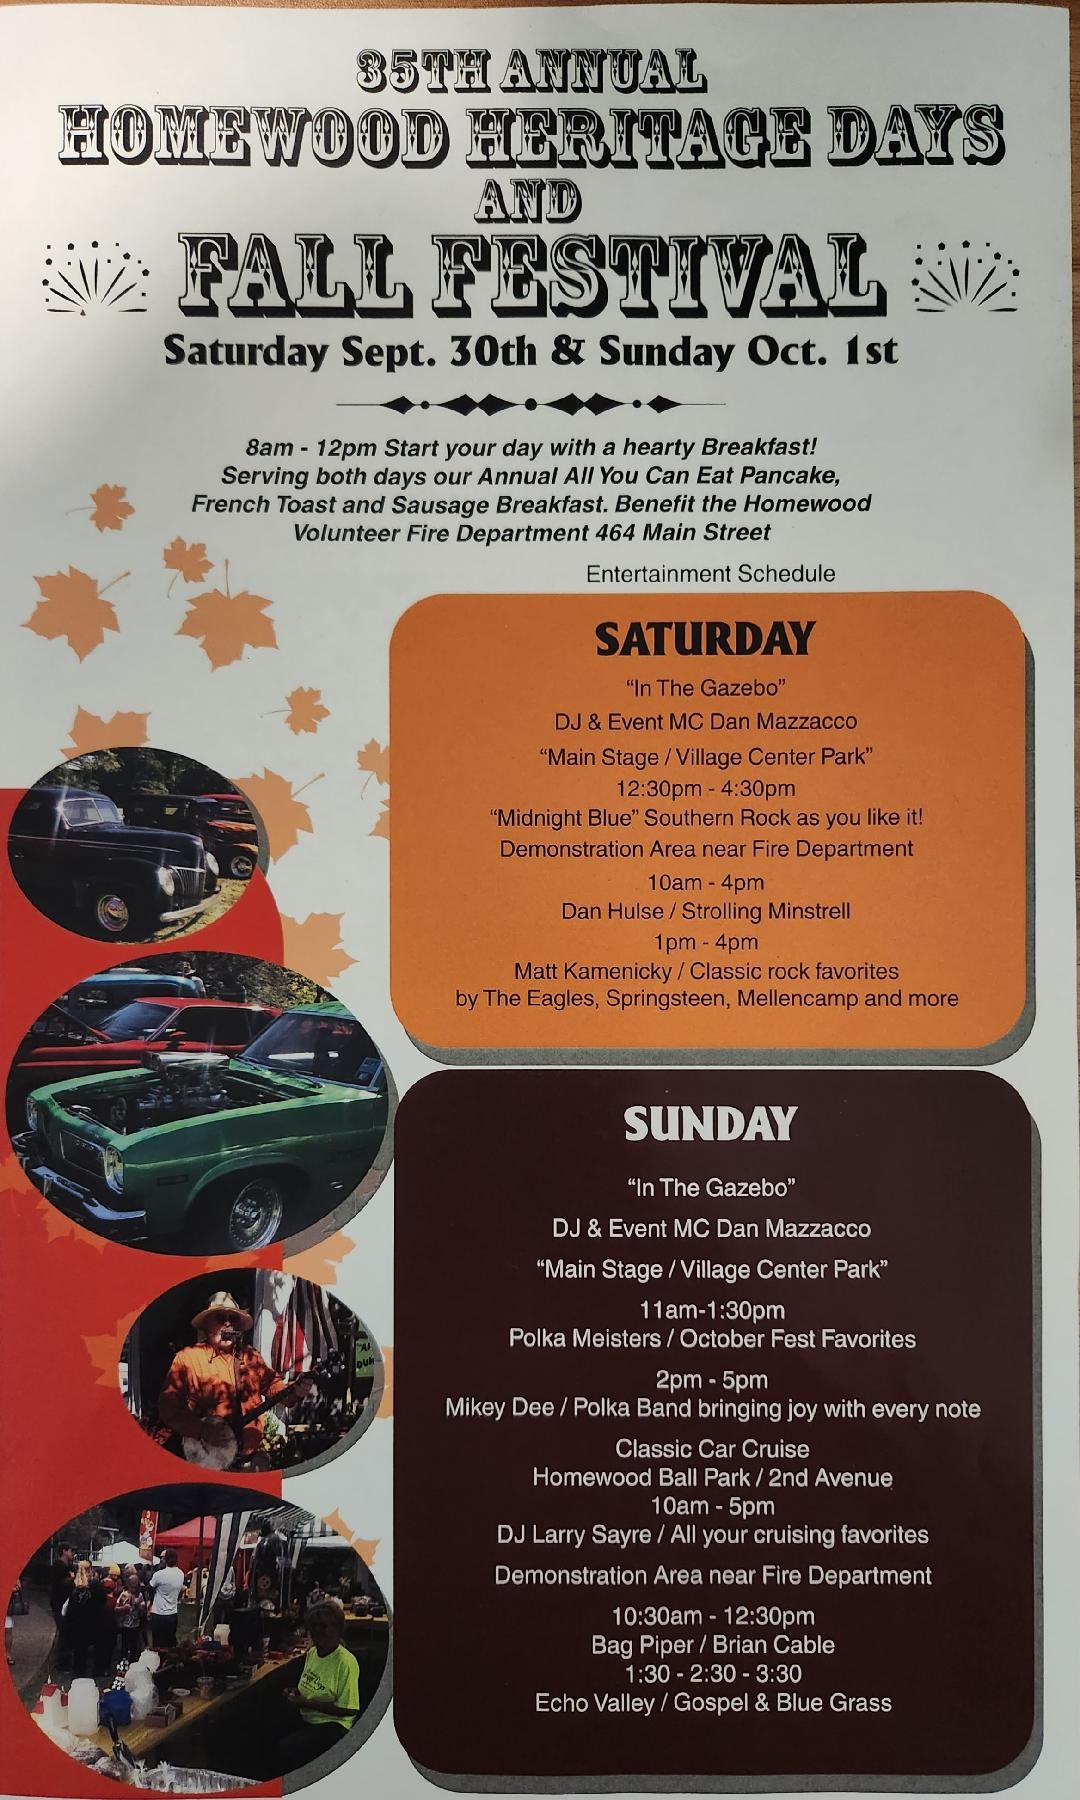 Homewood Heritage Days and Fall Festival